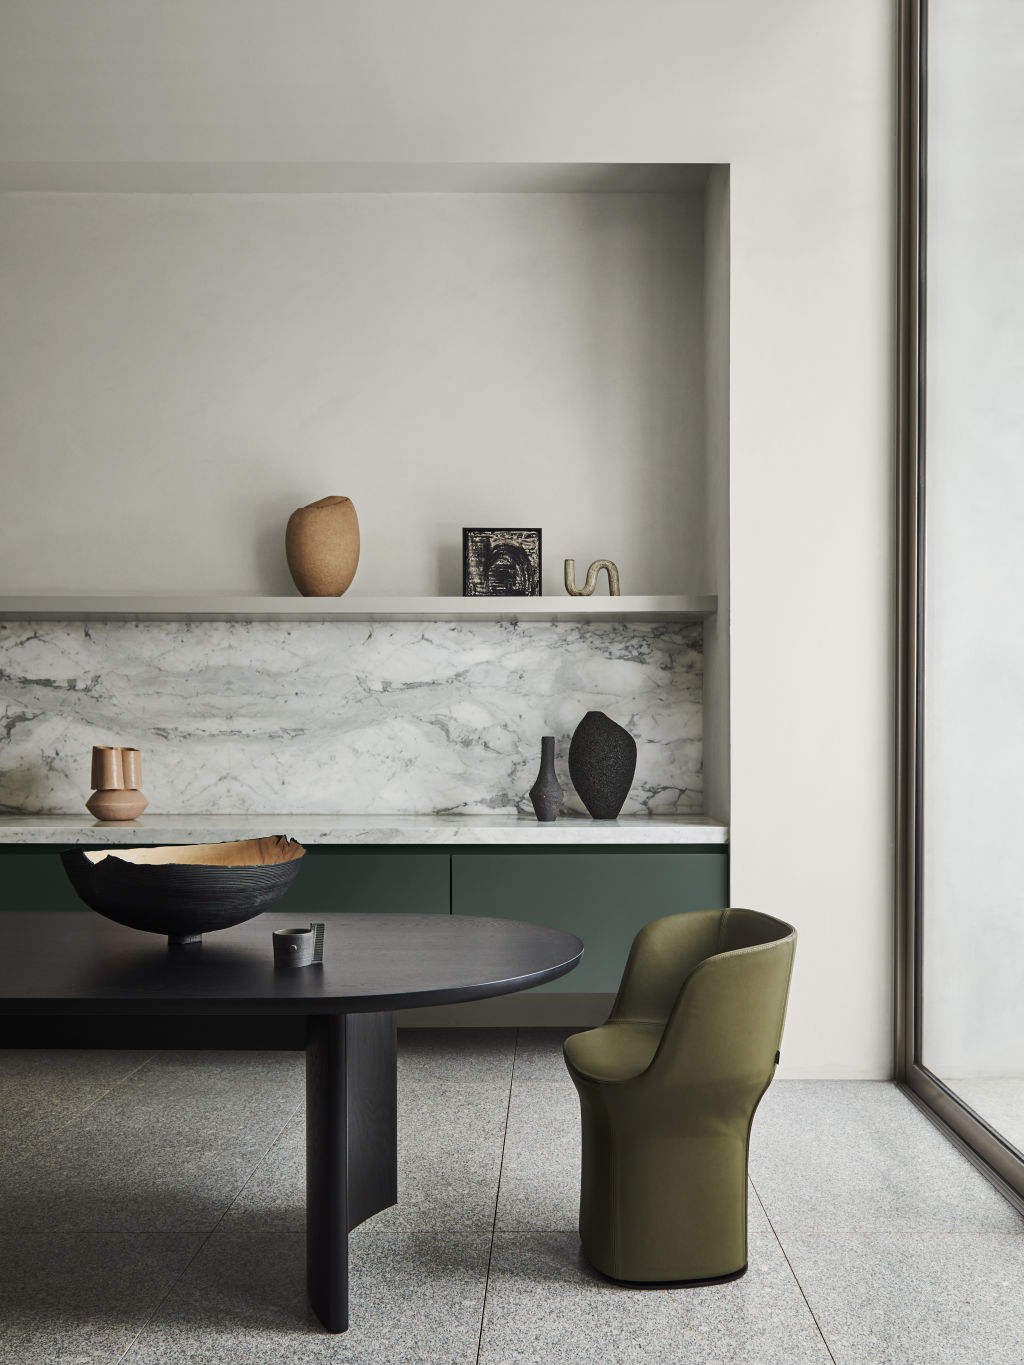 The Dulux 2022 colour forecast uses chocolate brown and earthy green in its Restore palette. Photo: Lisa Cohen. Styling: Bree Leech